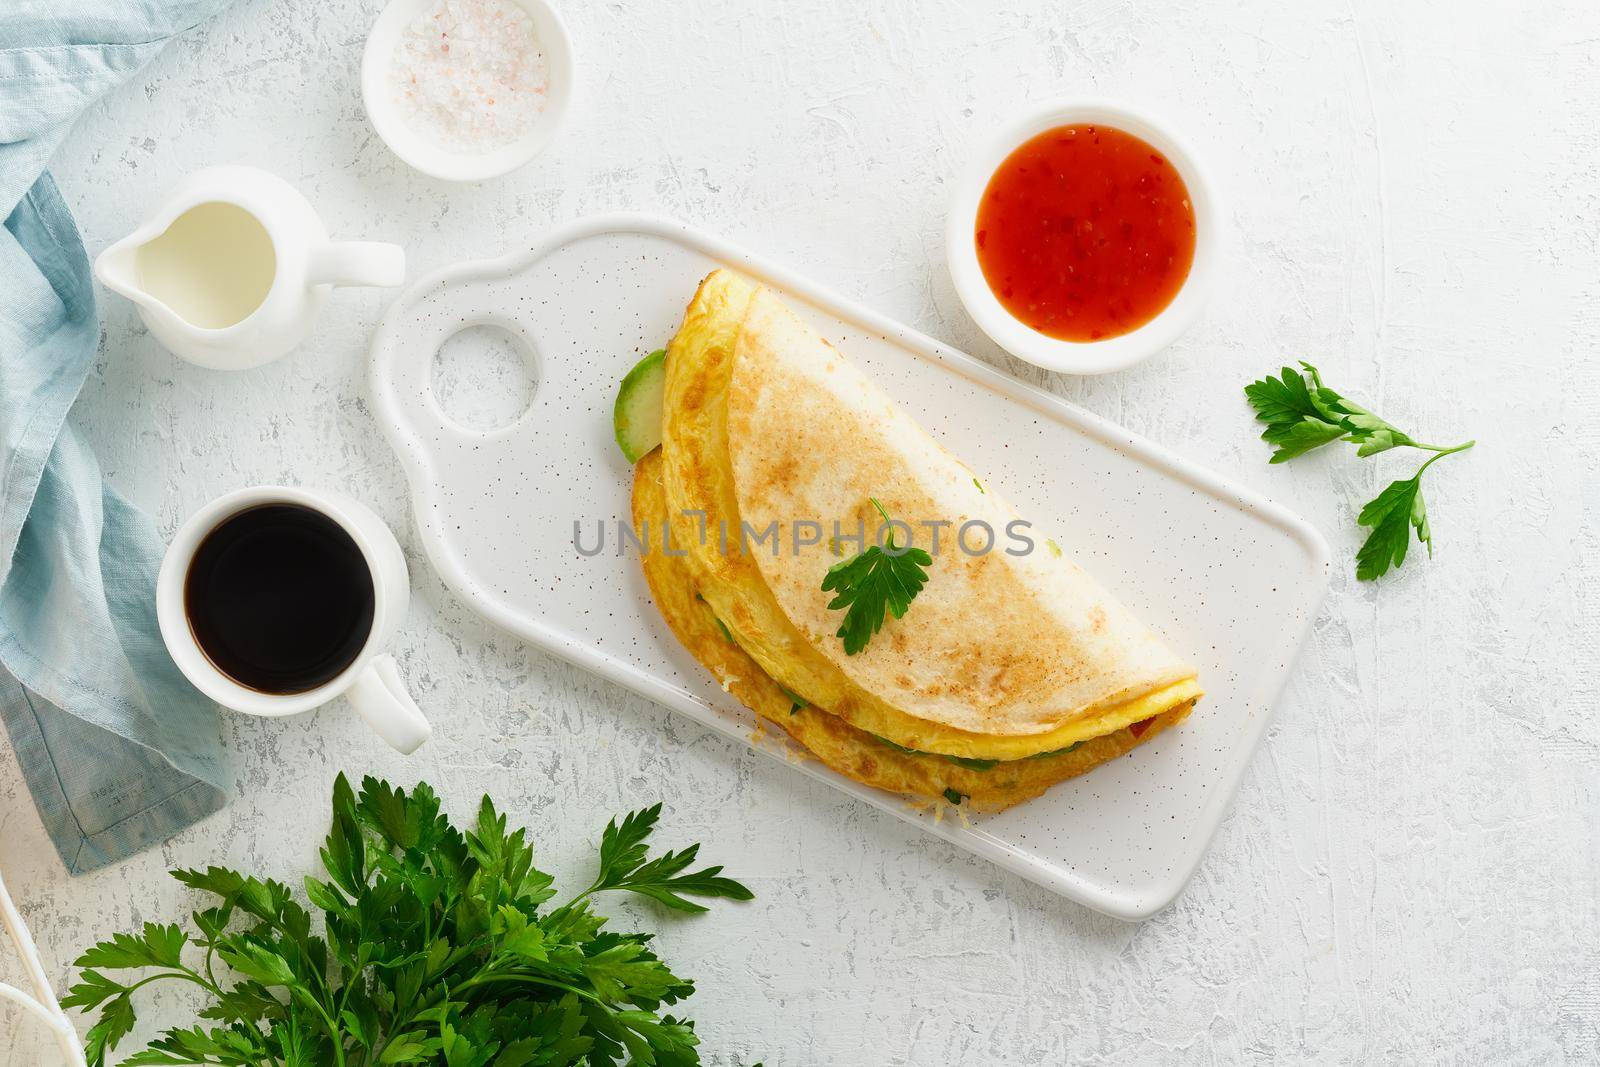 Trendy breakfast with quesadilla and eggs, trending food with omelet, cheese, peppers, tomatoes, avocado. Simple and easy lunch